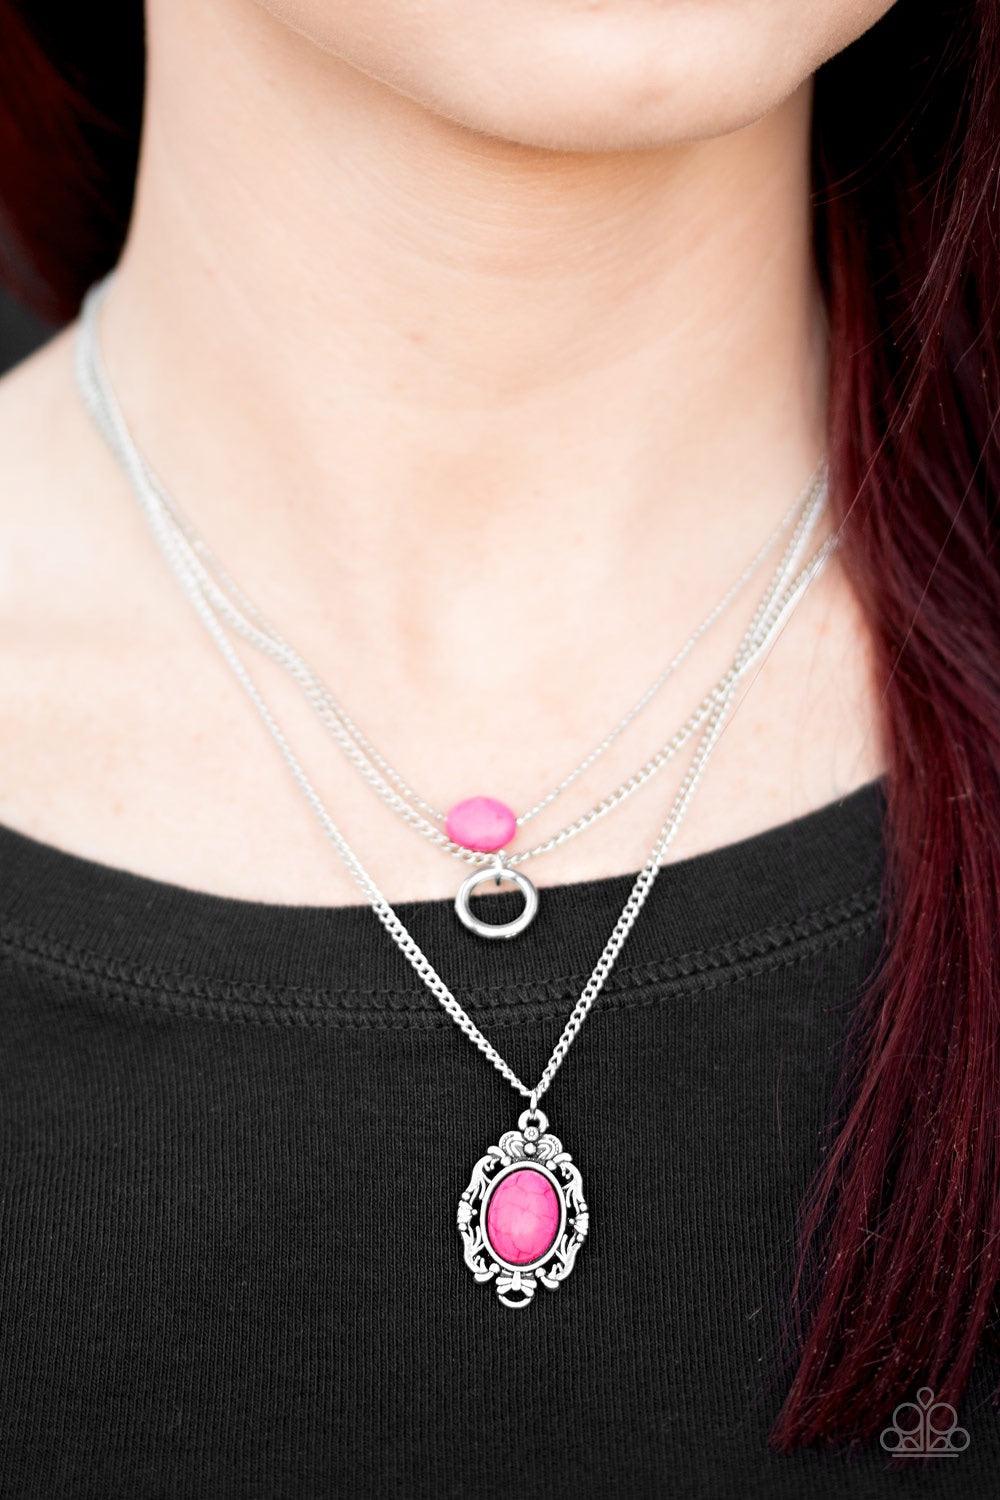 Paparazzi Accessories Canyon Cavalier - Pink A vivacious pink stone is suspended from the uppermost chain above a shimmery silver hoop and a pink stone pendant. Brushed in an antiqued shimmer, a regal silver frame encircles a pink stone, creating a whimsi